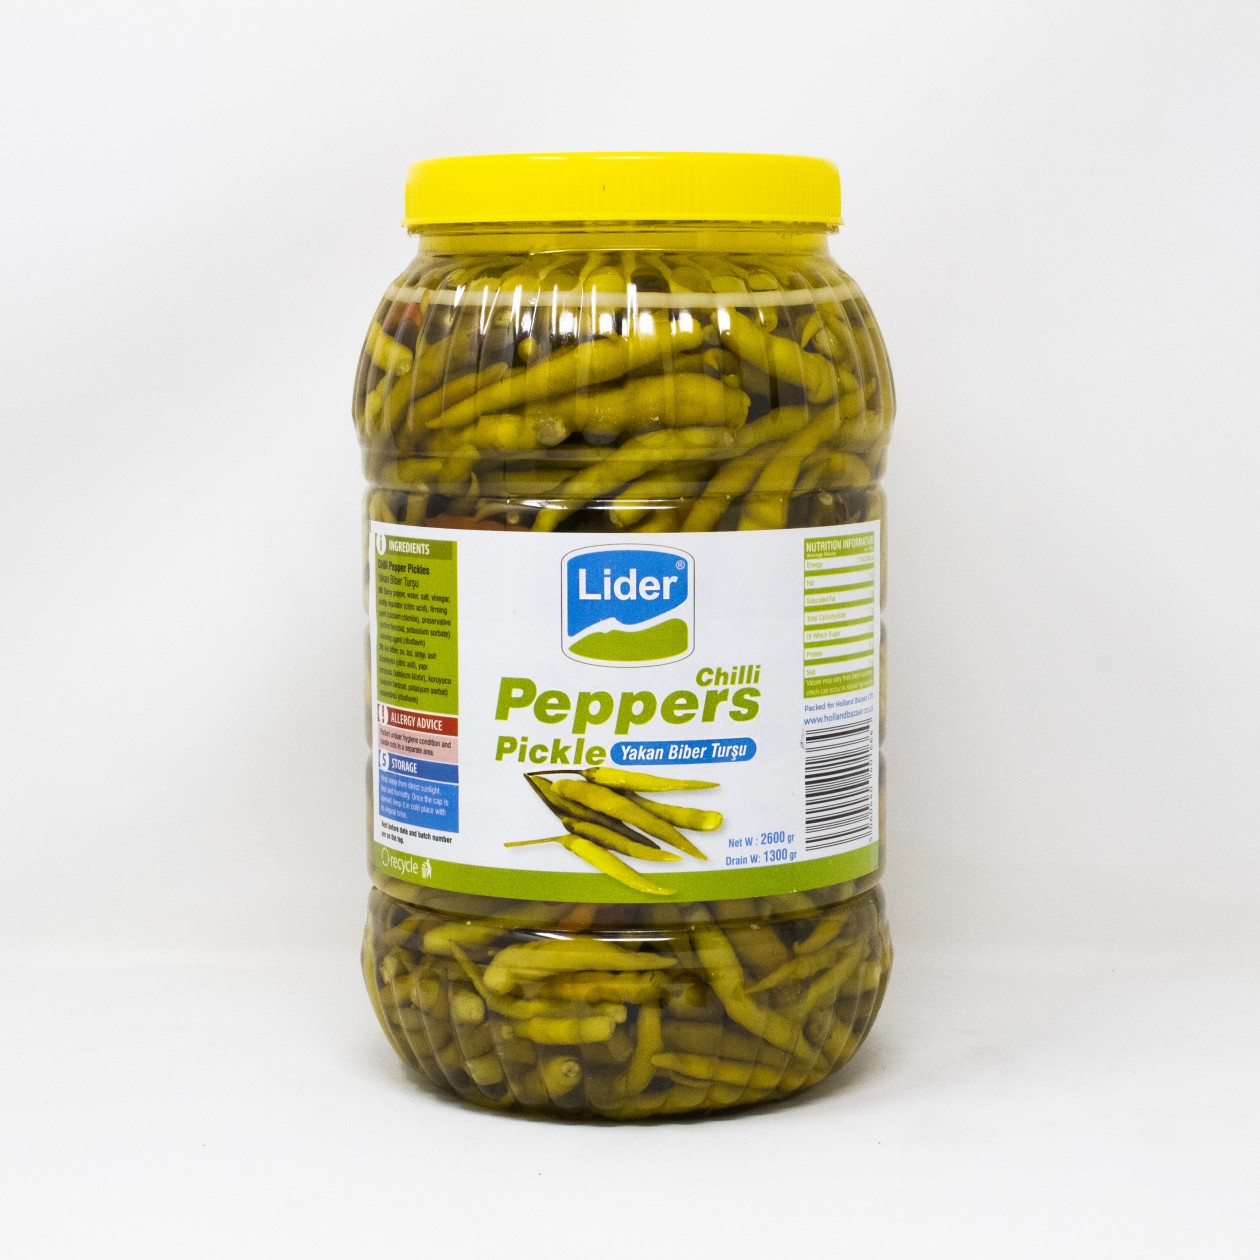 Lider Hot Chilli Peppers Pickle 2600g